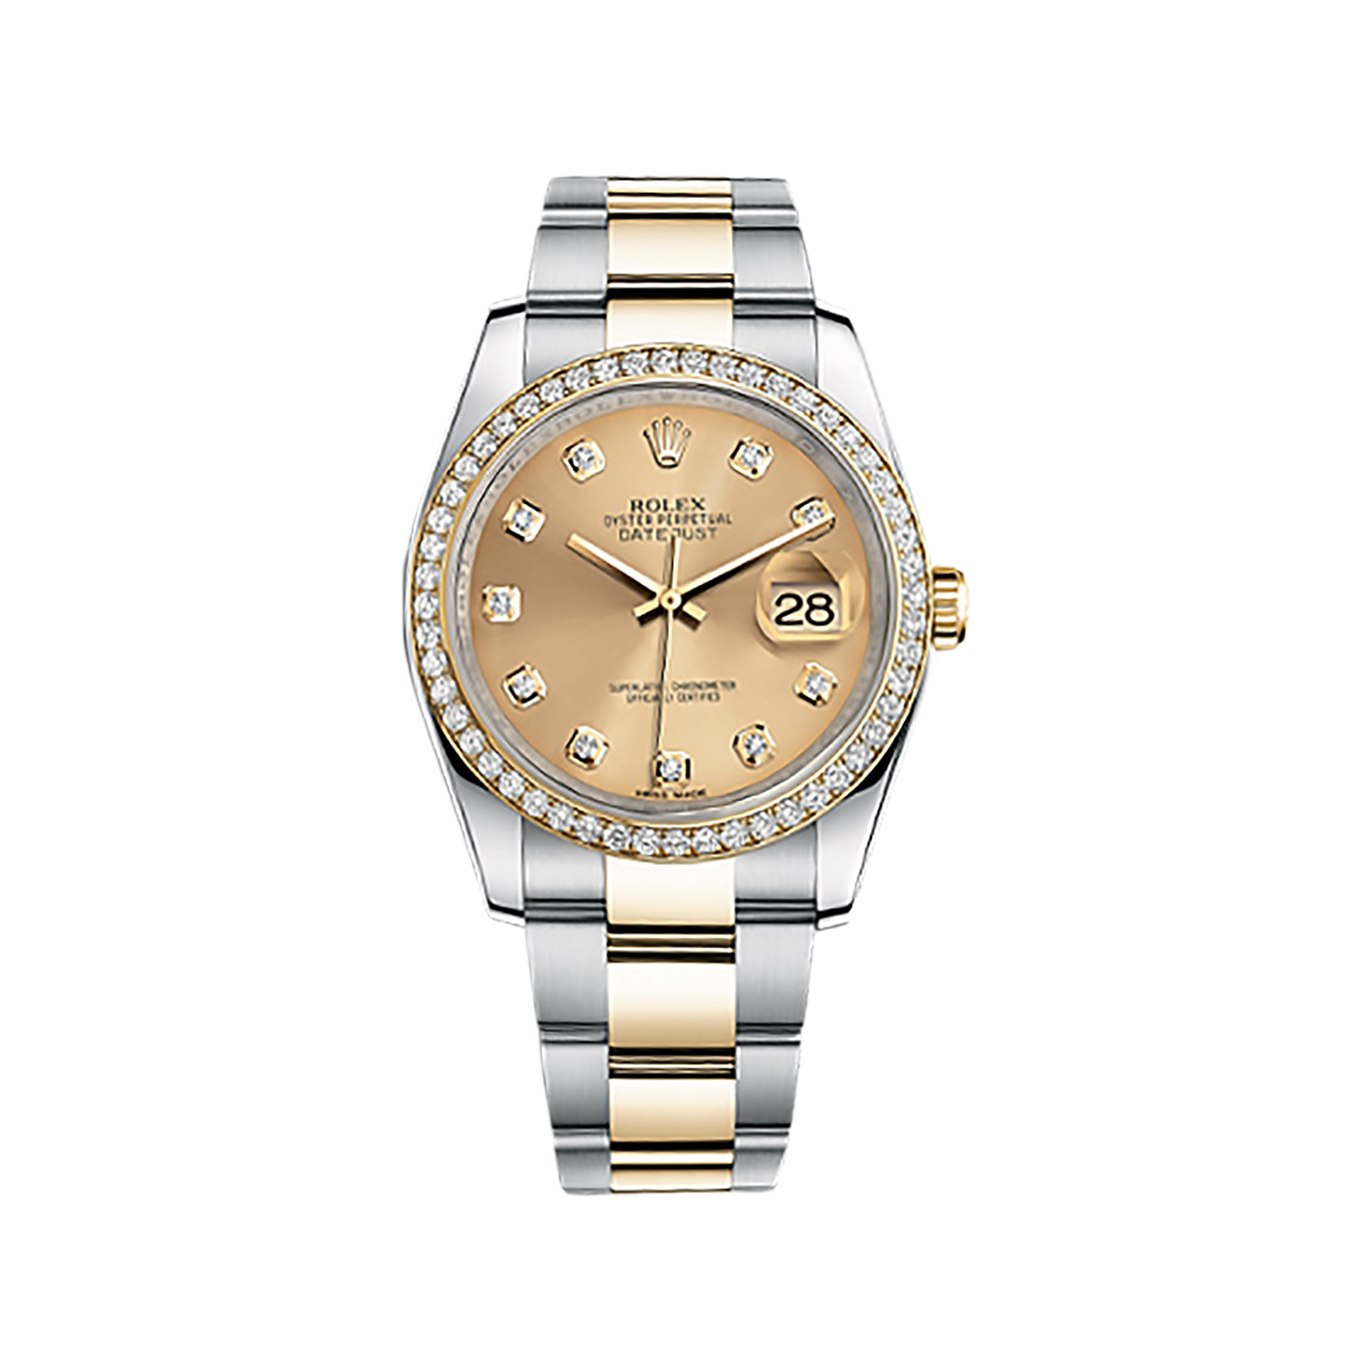 Datejust 36 116243 Gold & Stainless Steel Watch (Champagne Set with Diamonds)